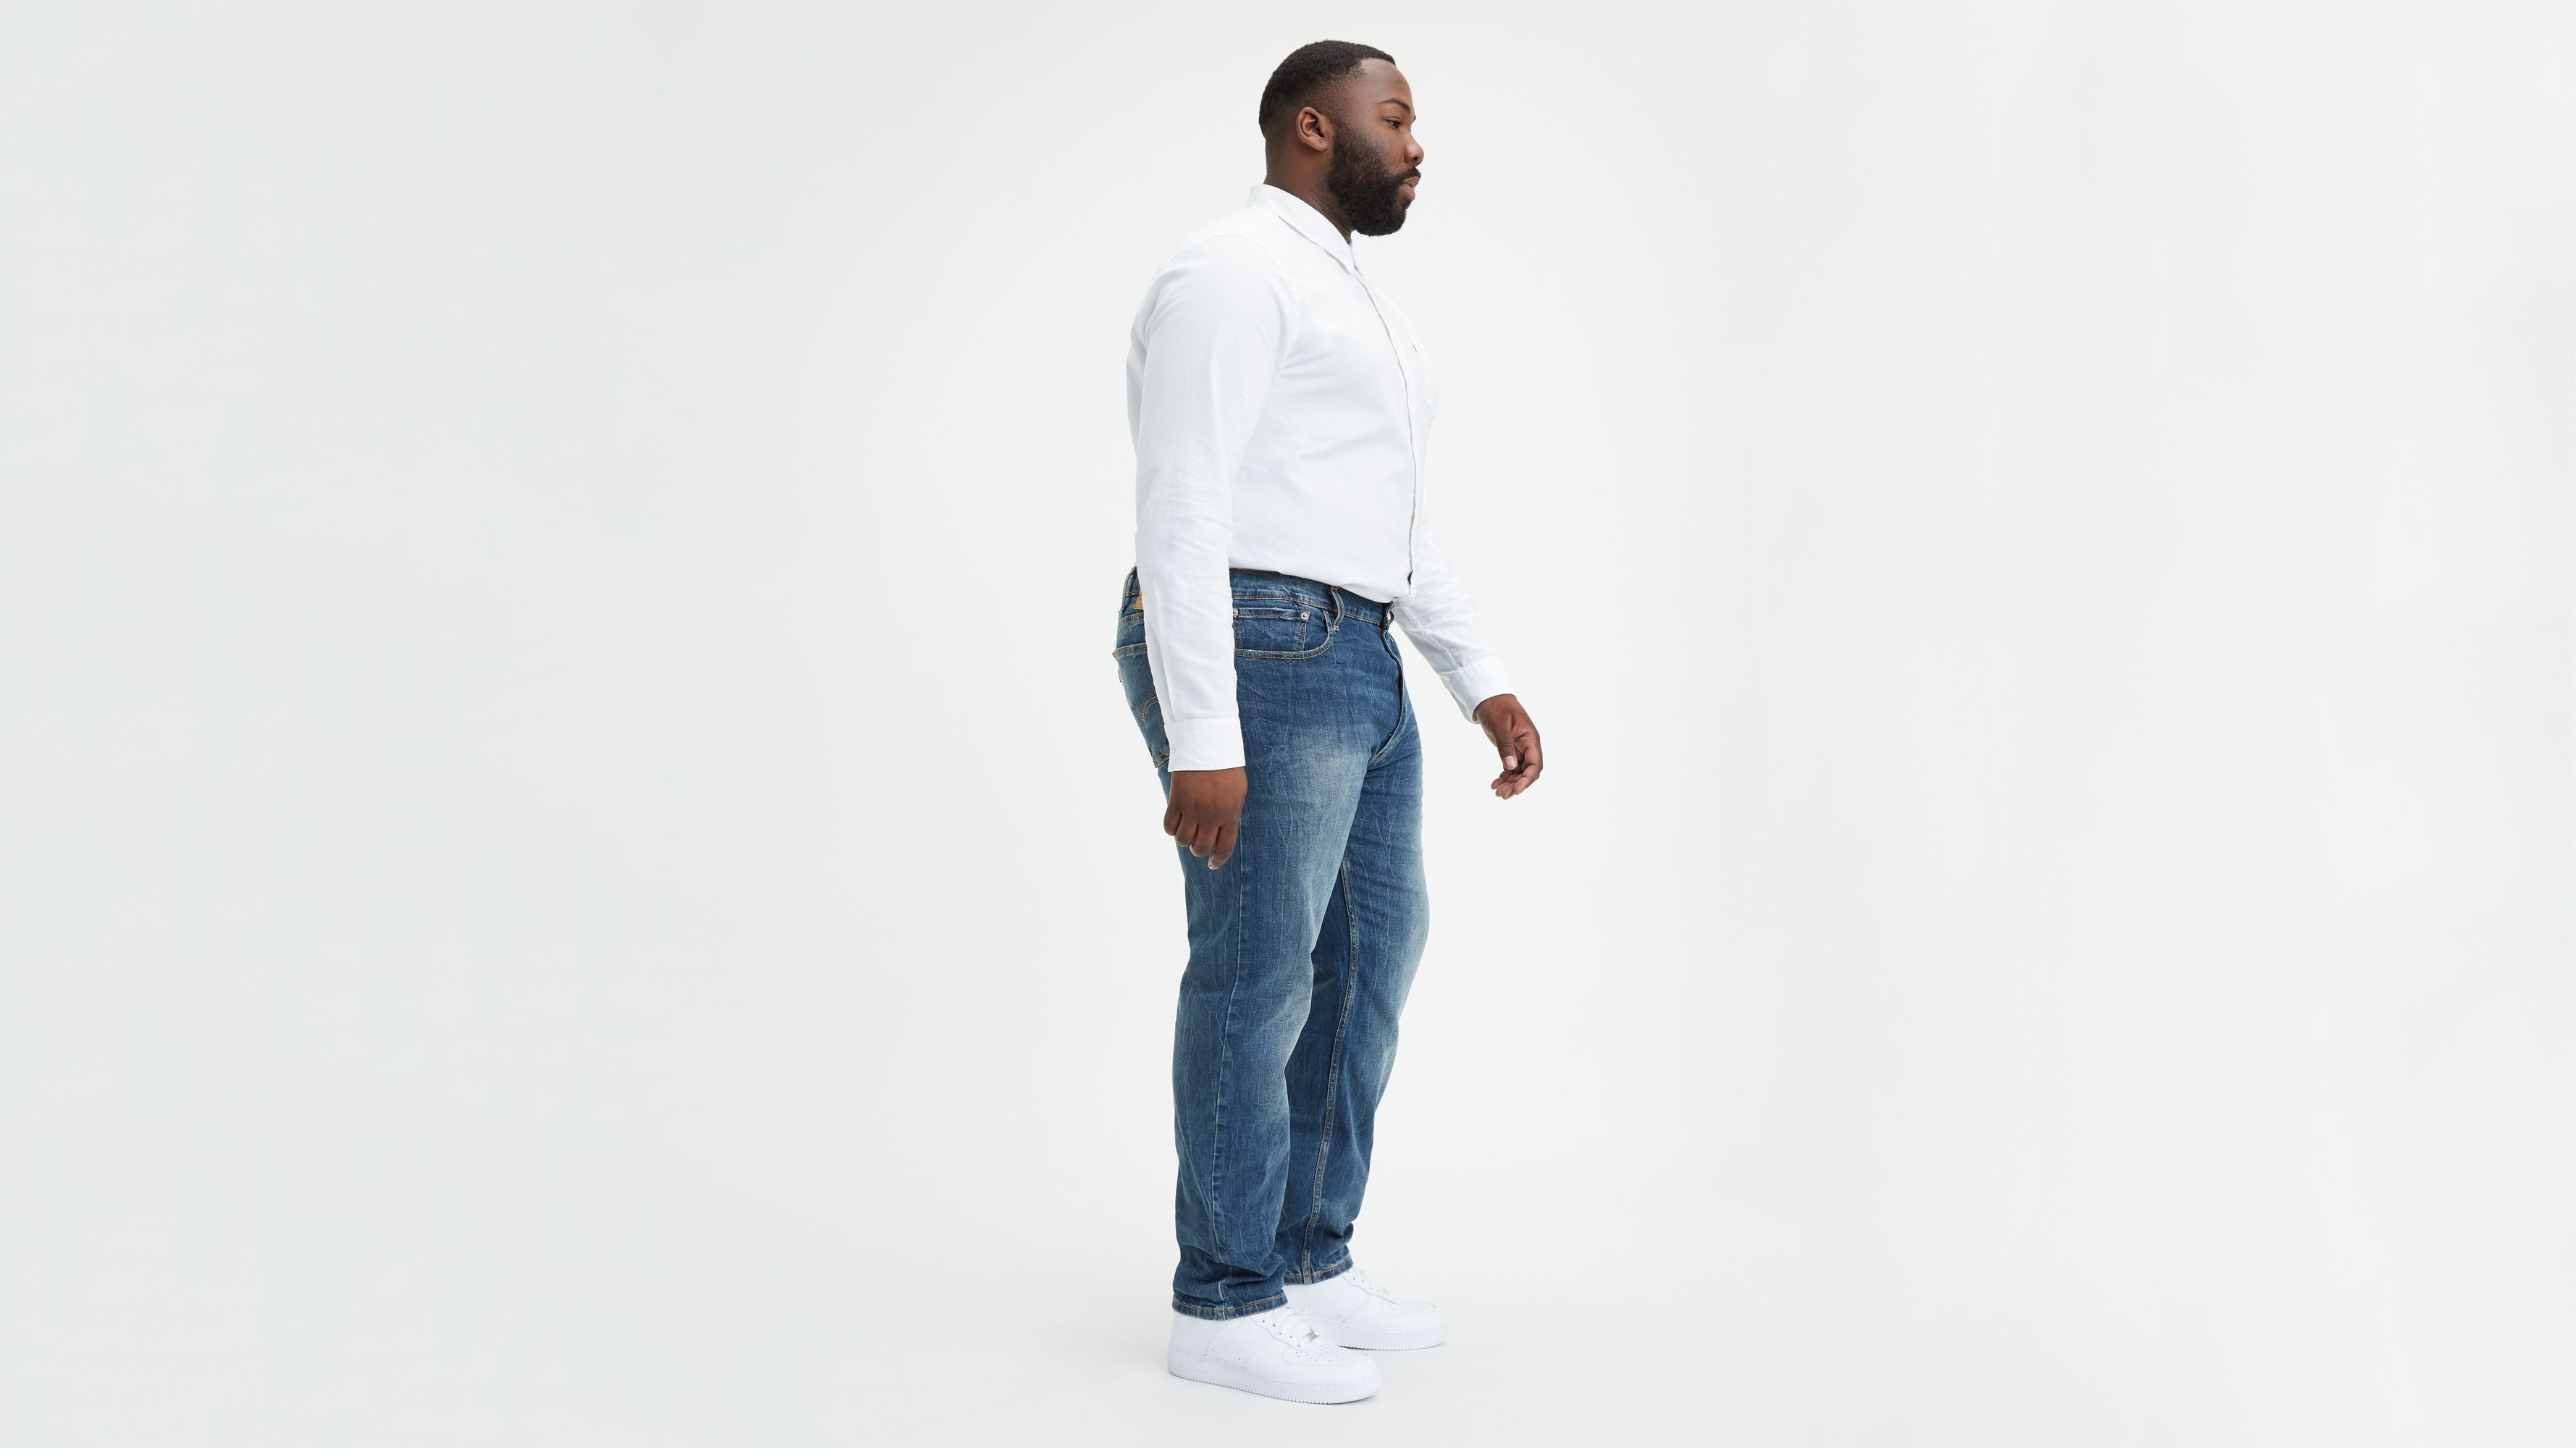 levi's mens tapered jeans